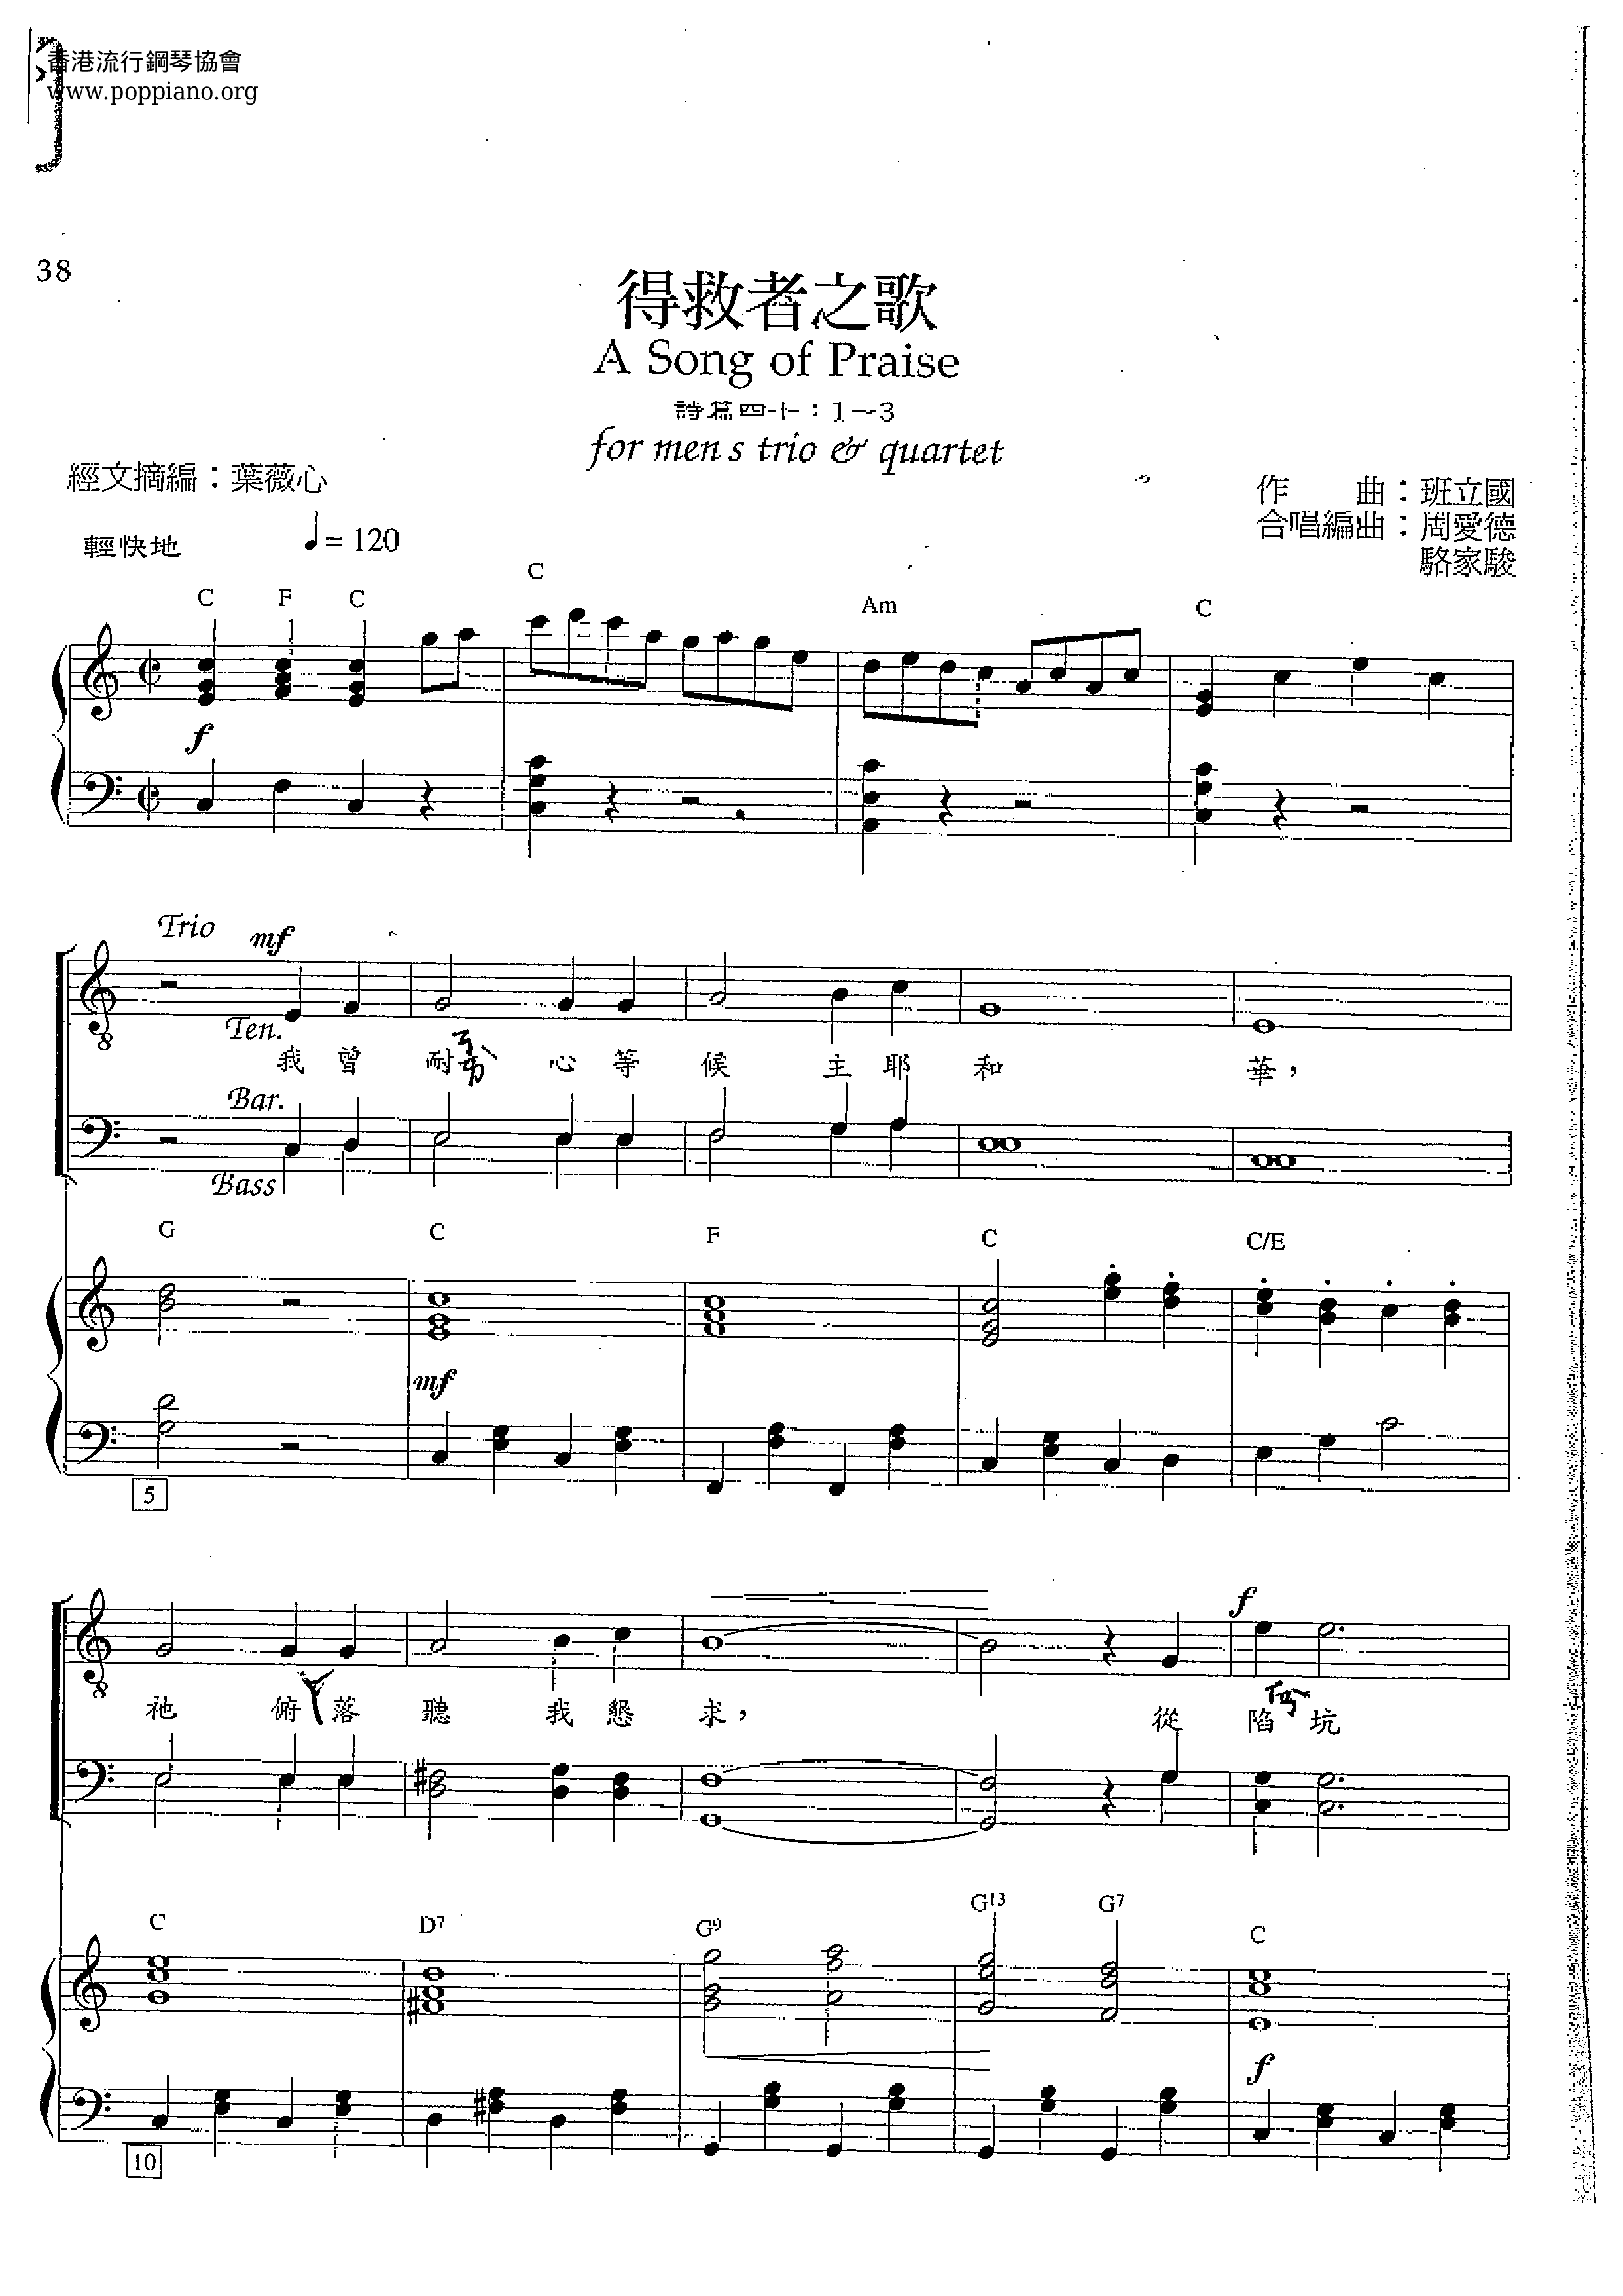 Song Of The Saved Score